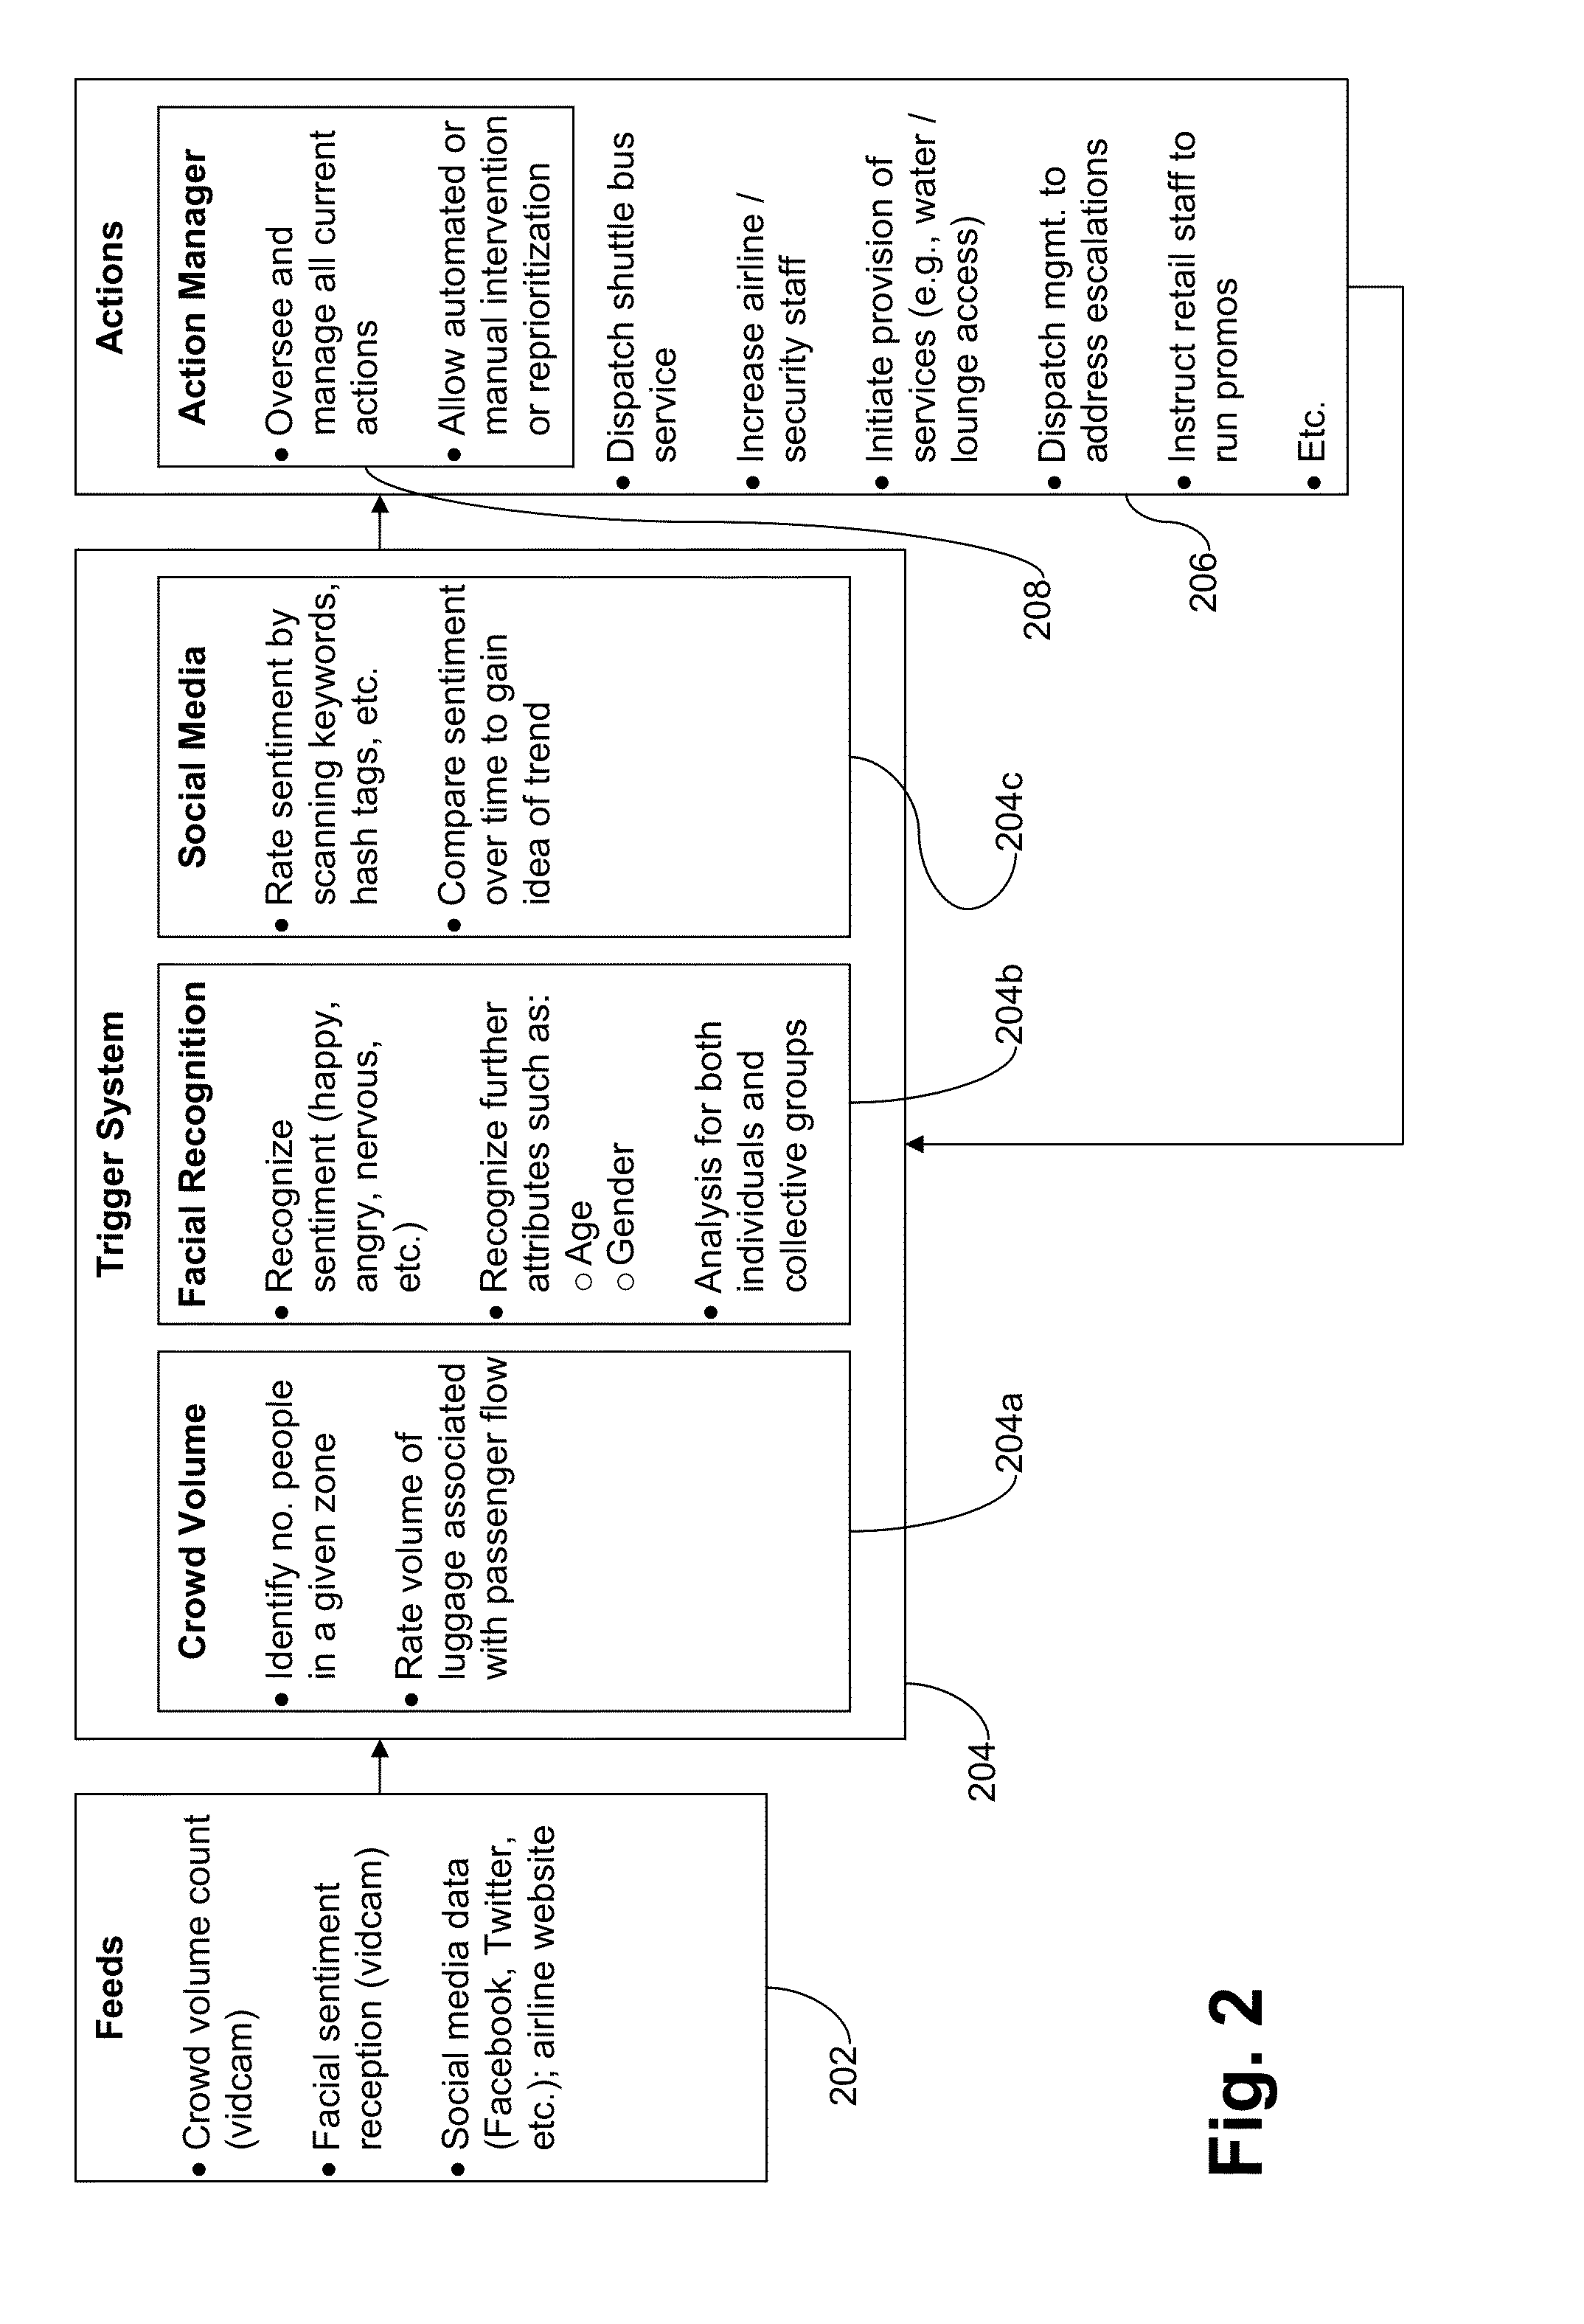 Large venue surveillance and reaction systems and methods using dynamically analyzed emotional input